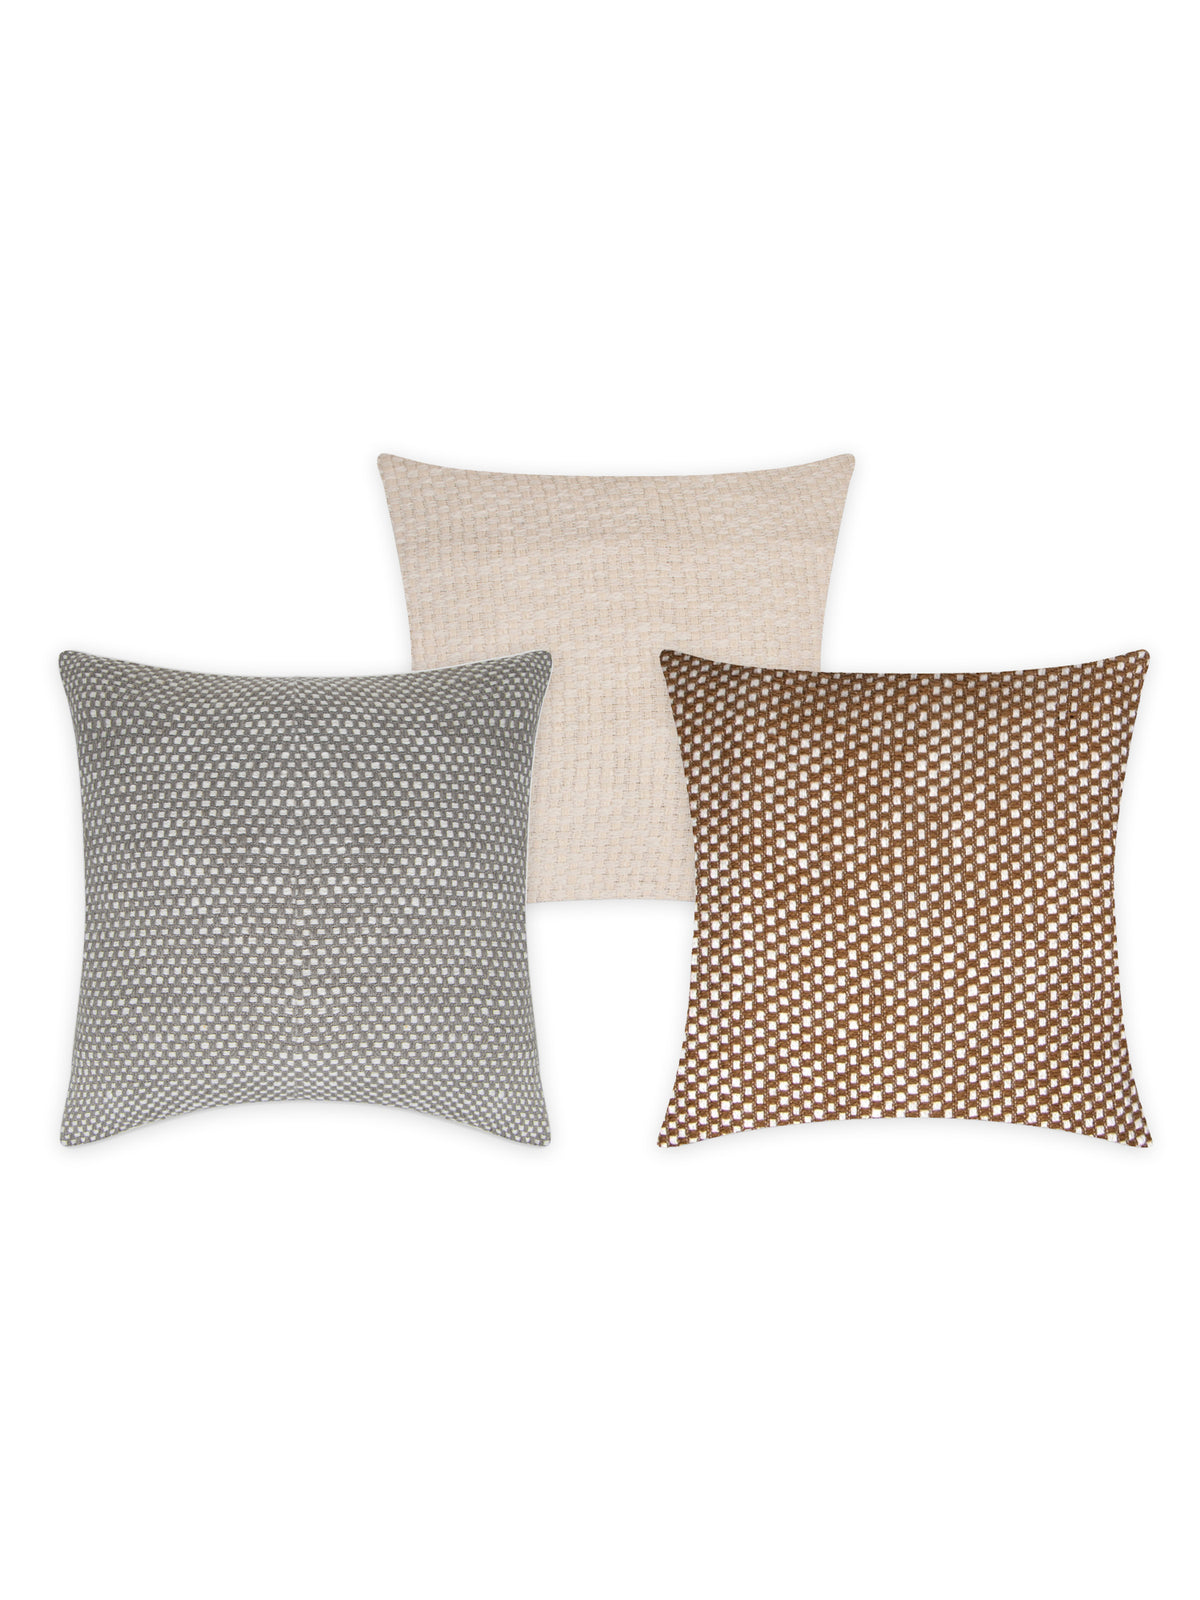 Basket Weave Pattern Cushion Covers Pack of 3